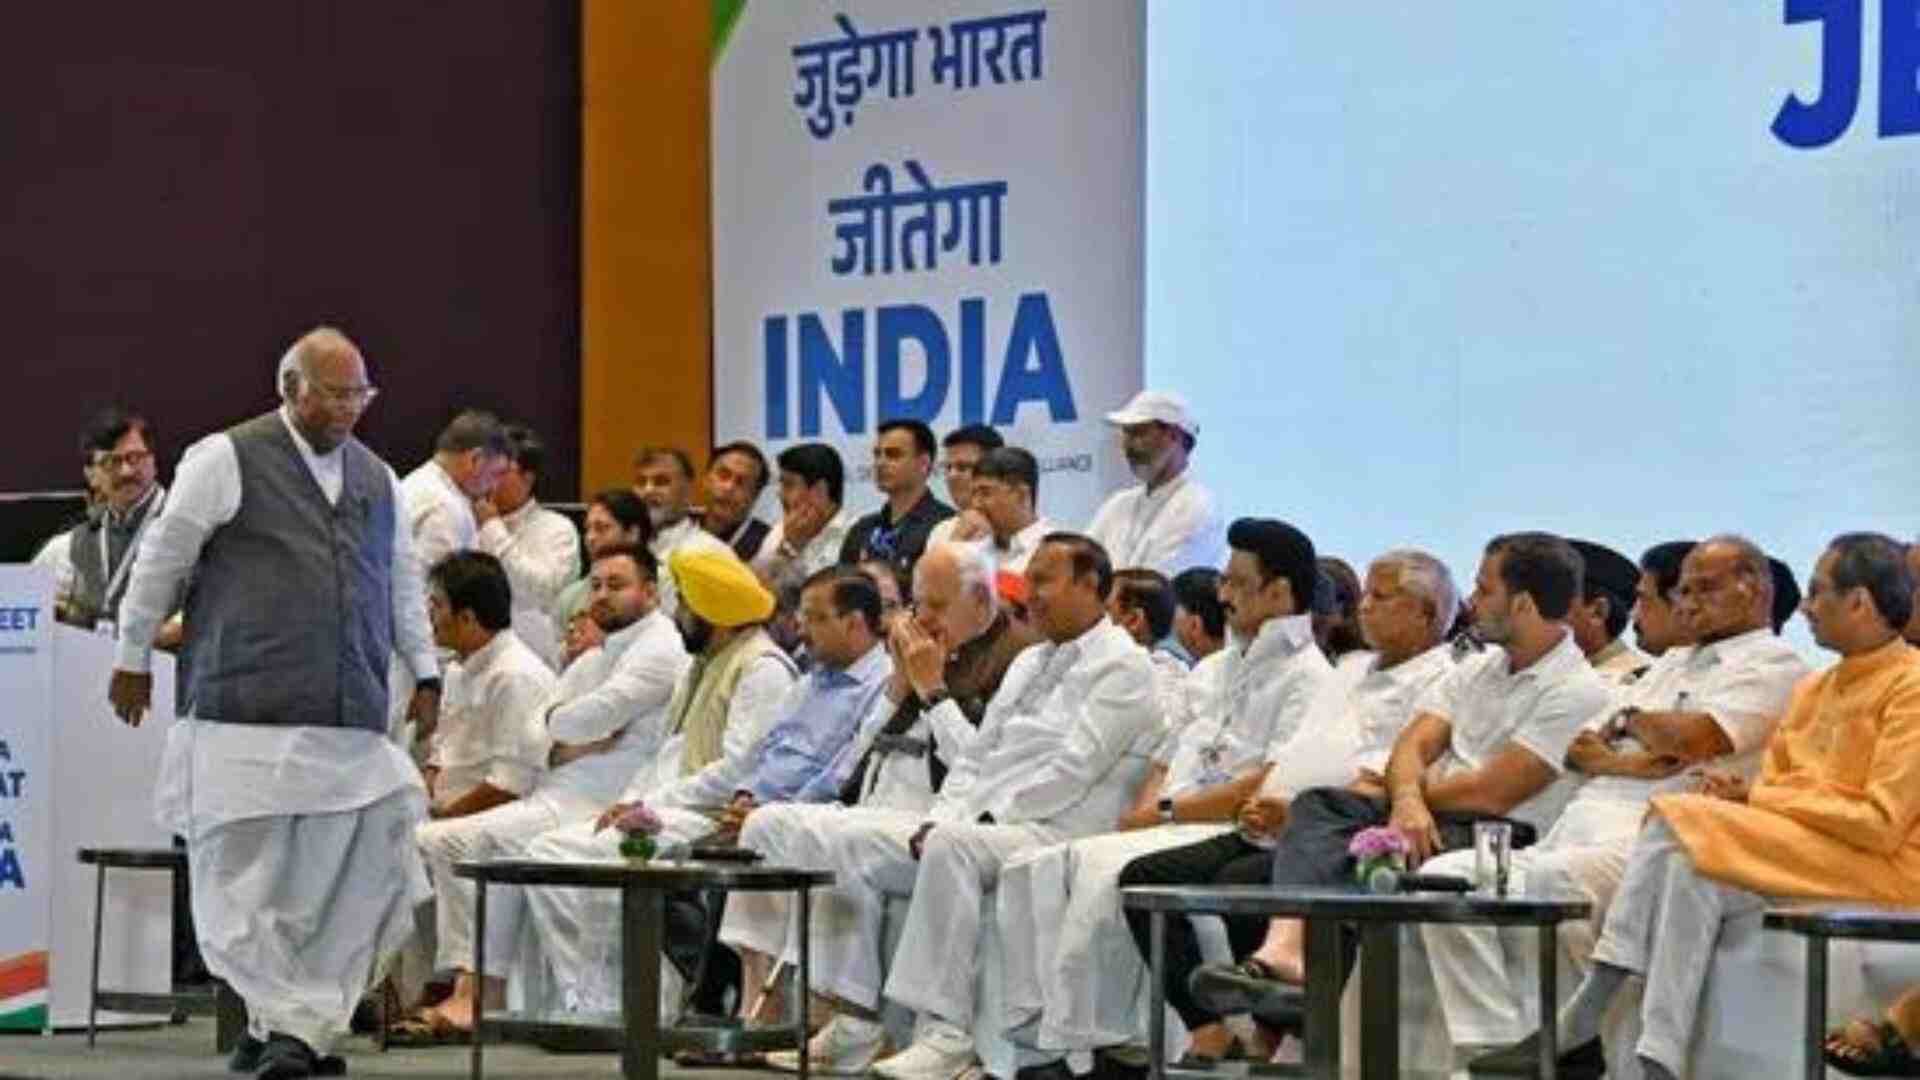 INDIA bloc to protest against discriminatory budget on Wednesday, Congress CMS to boycott Niti Aayog meet on July 27